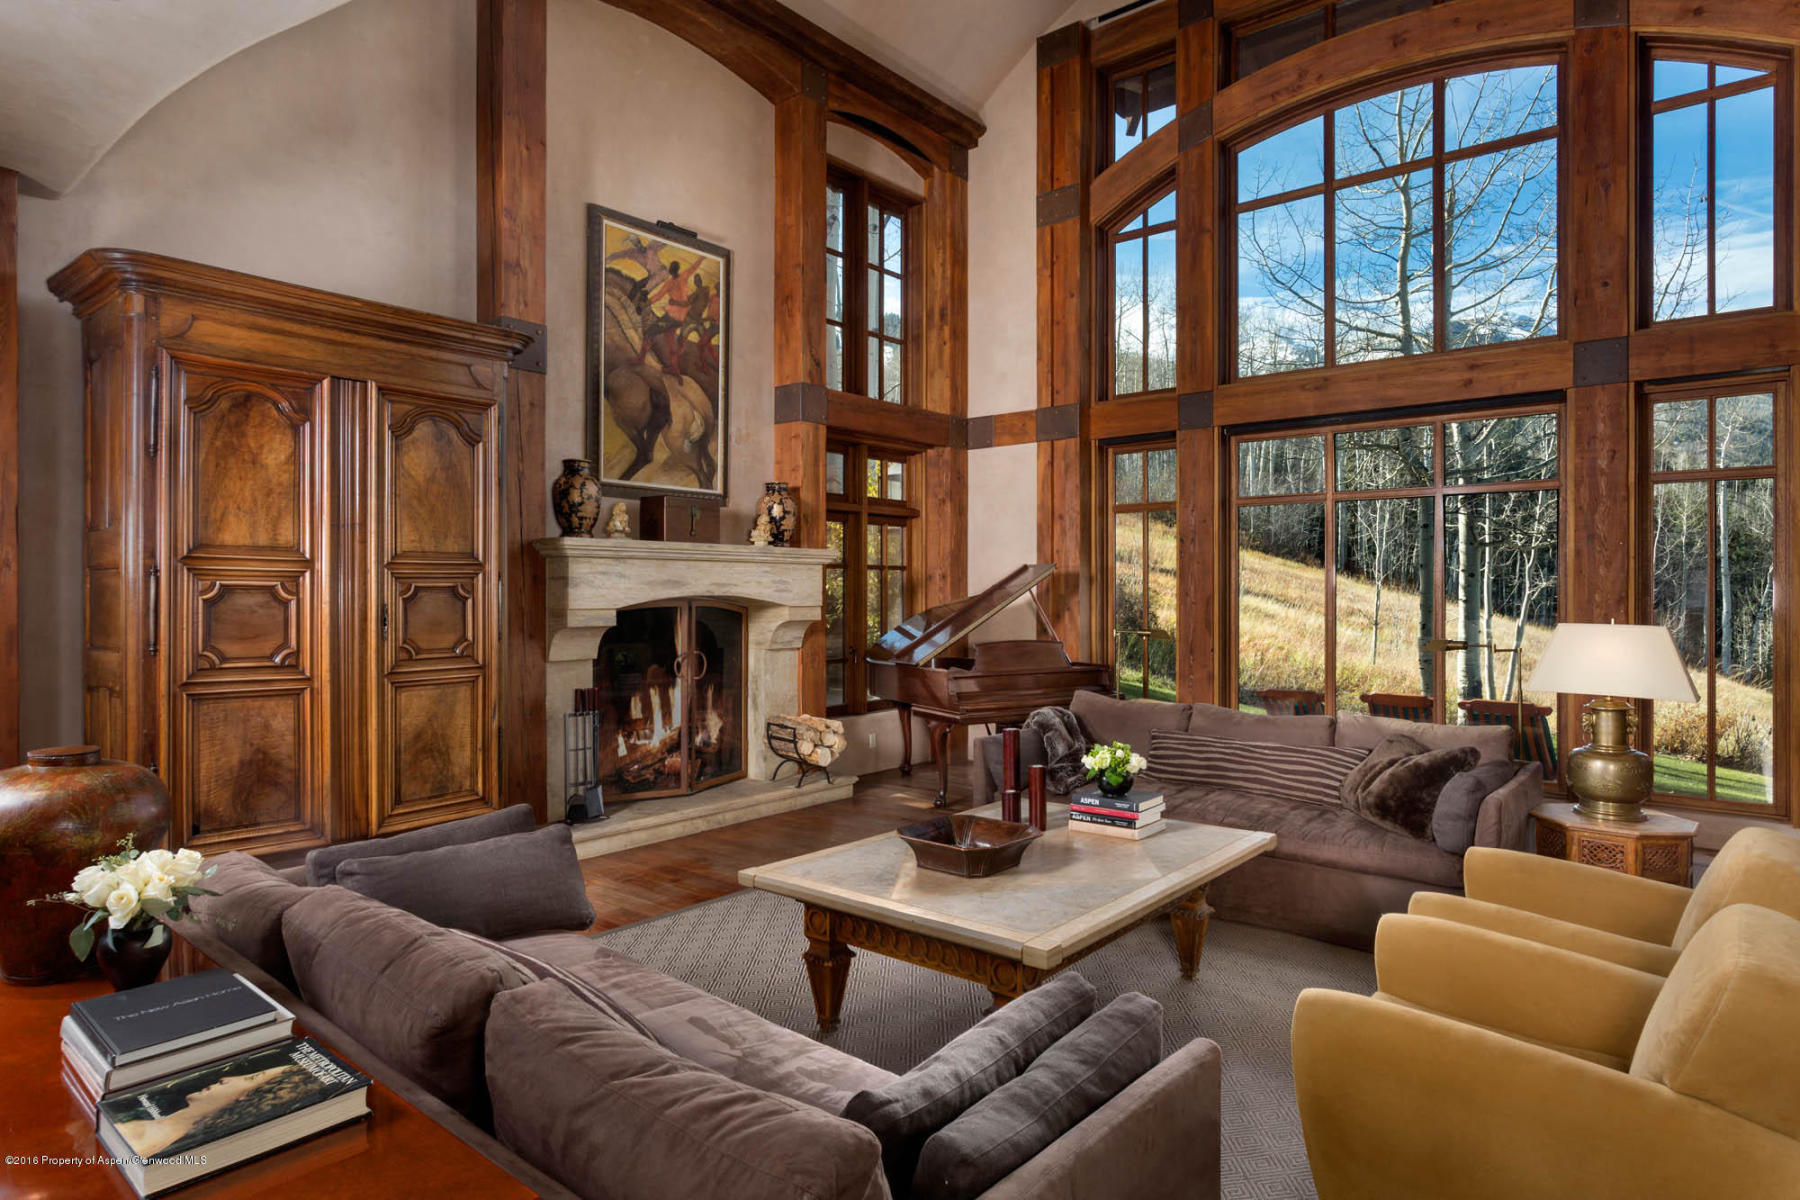 The Top 5 Most Expensive Home Sales in Snowmass Village in 2018